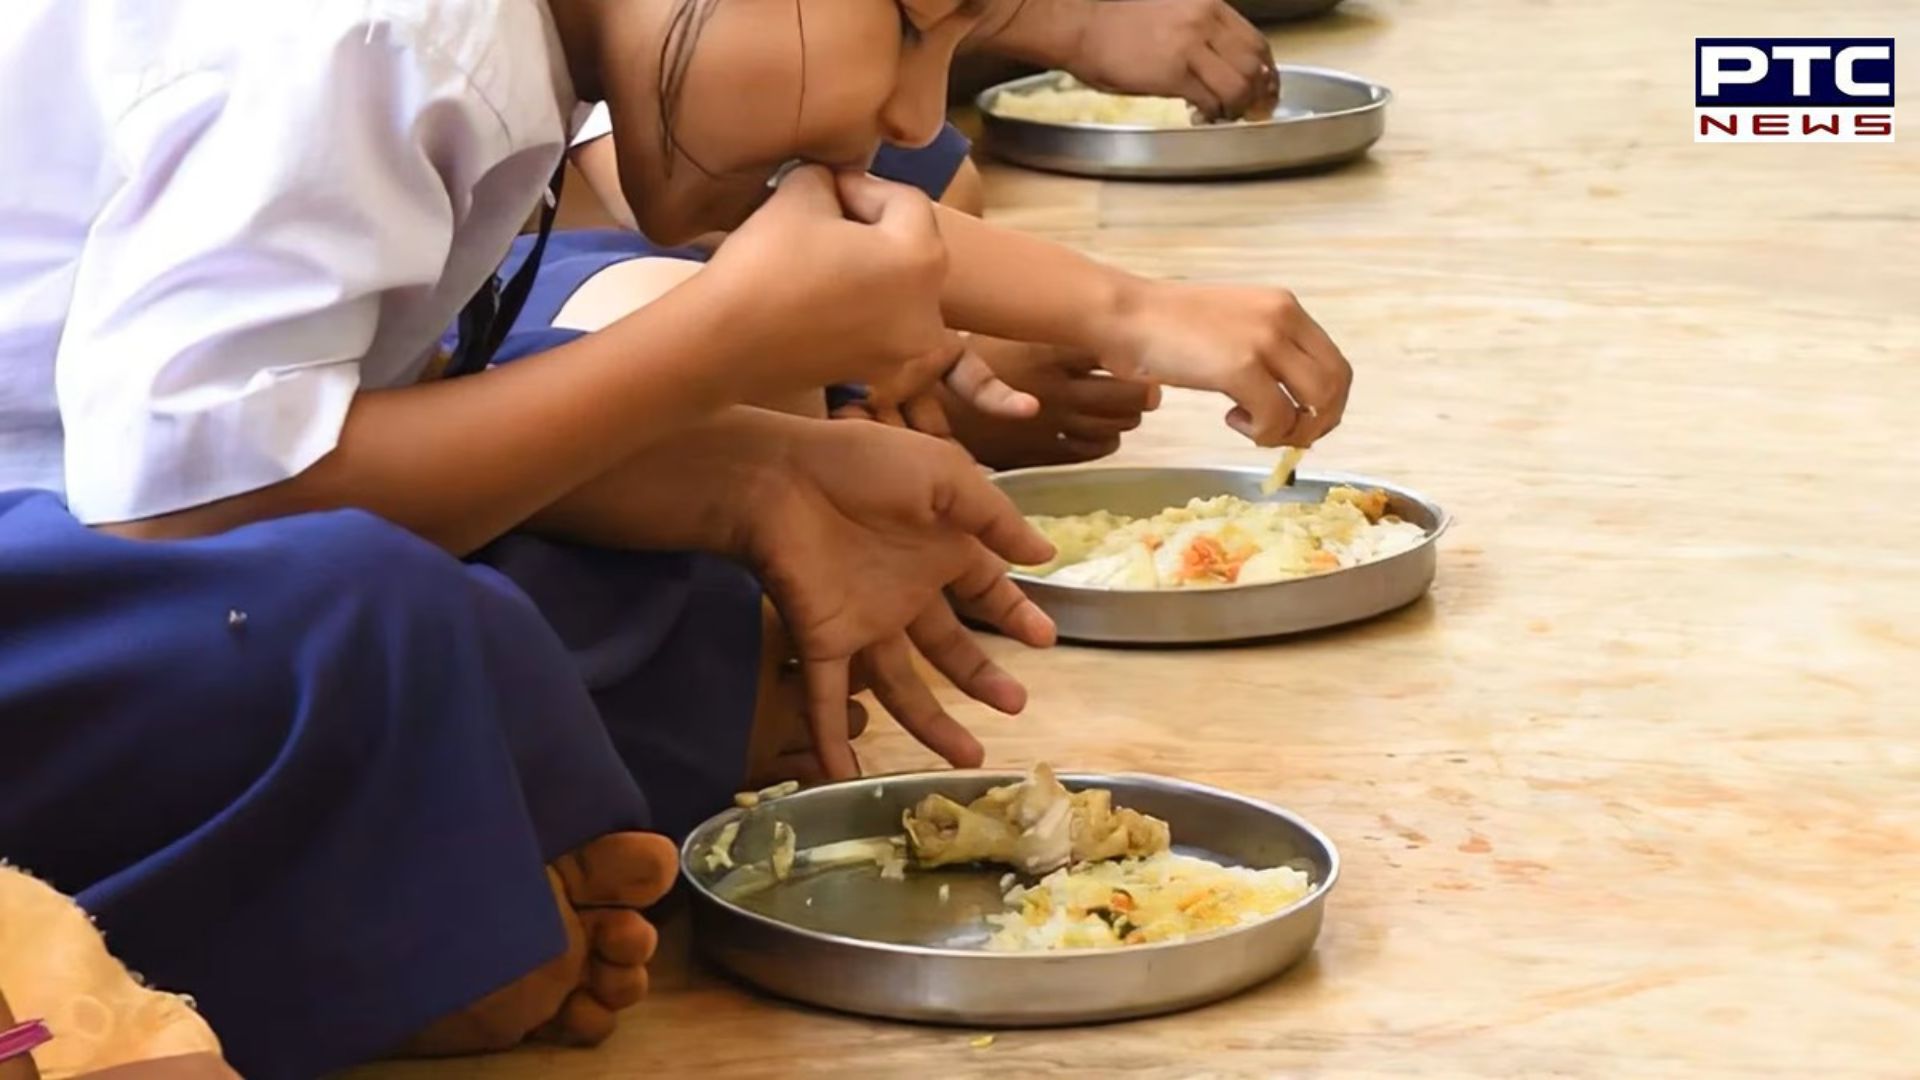 Madhya Pradesh: 58 school children fall sick after eating meal on R-Day